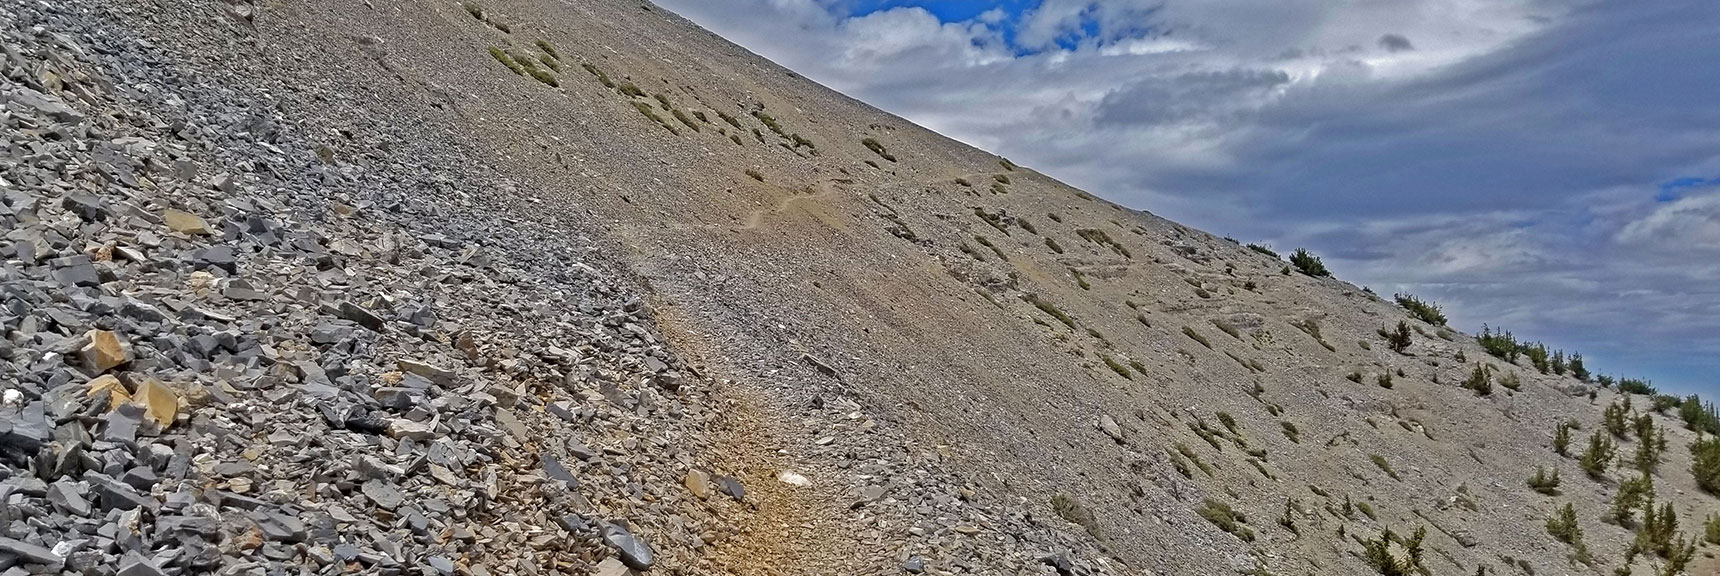 Final Switchbacks to Charleston Peak Summit. Not as Difficult as the "Mid-Ridge Ladder". | Lee and Charleston Peaks via Lee Canyon Mid Ridge | Mt Charleston Wilderness | Spring Mountains, Nevada